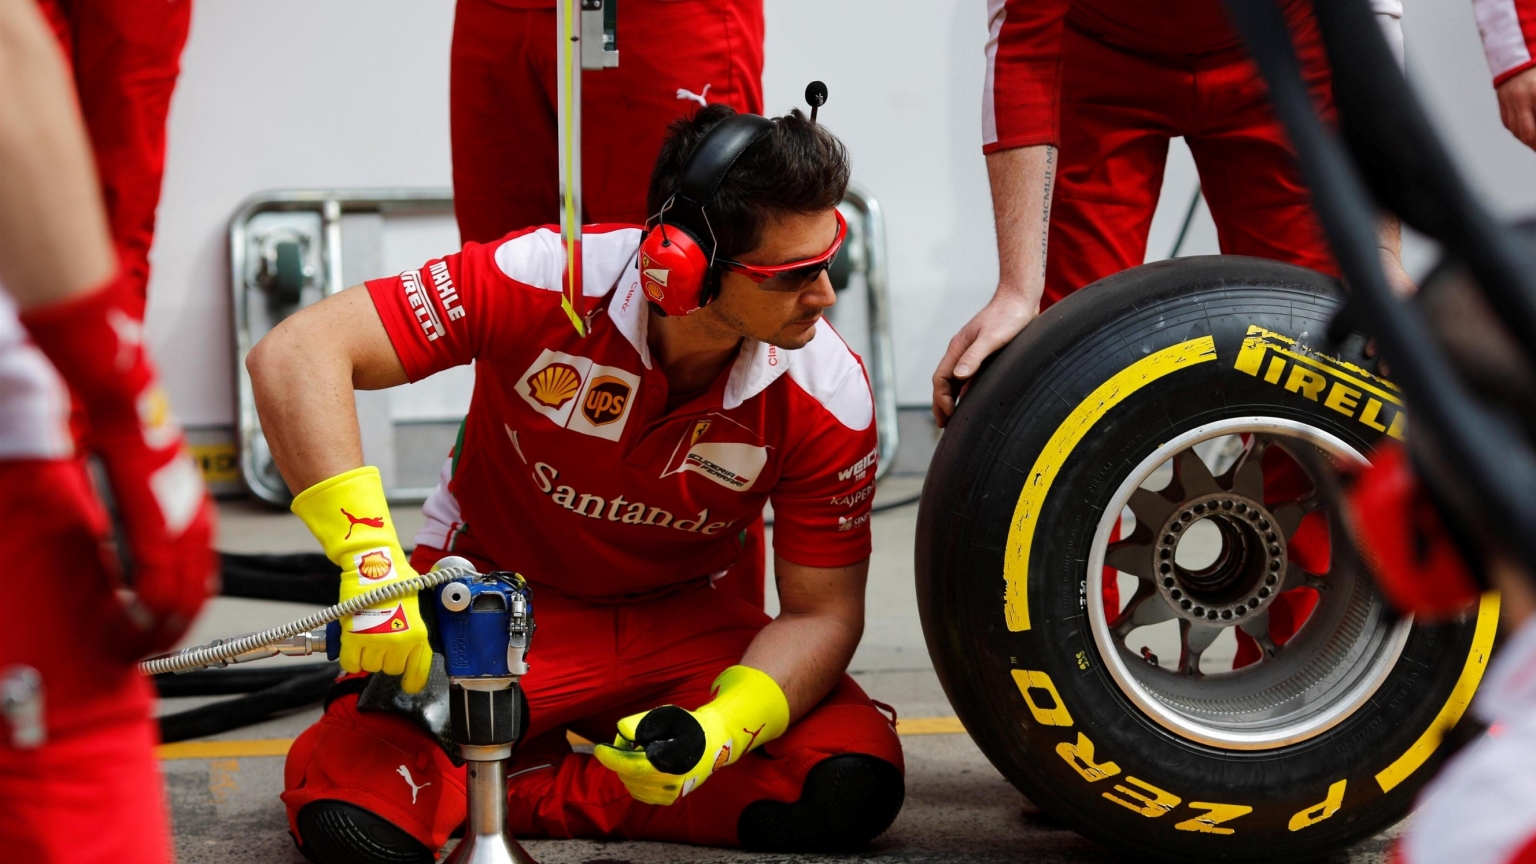 Mechanics and tyres in the Ferrari pits.